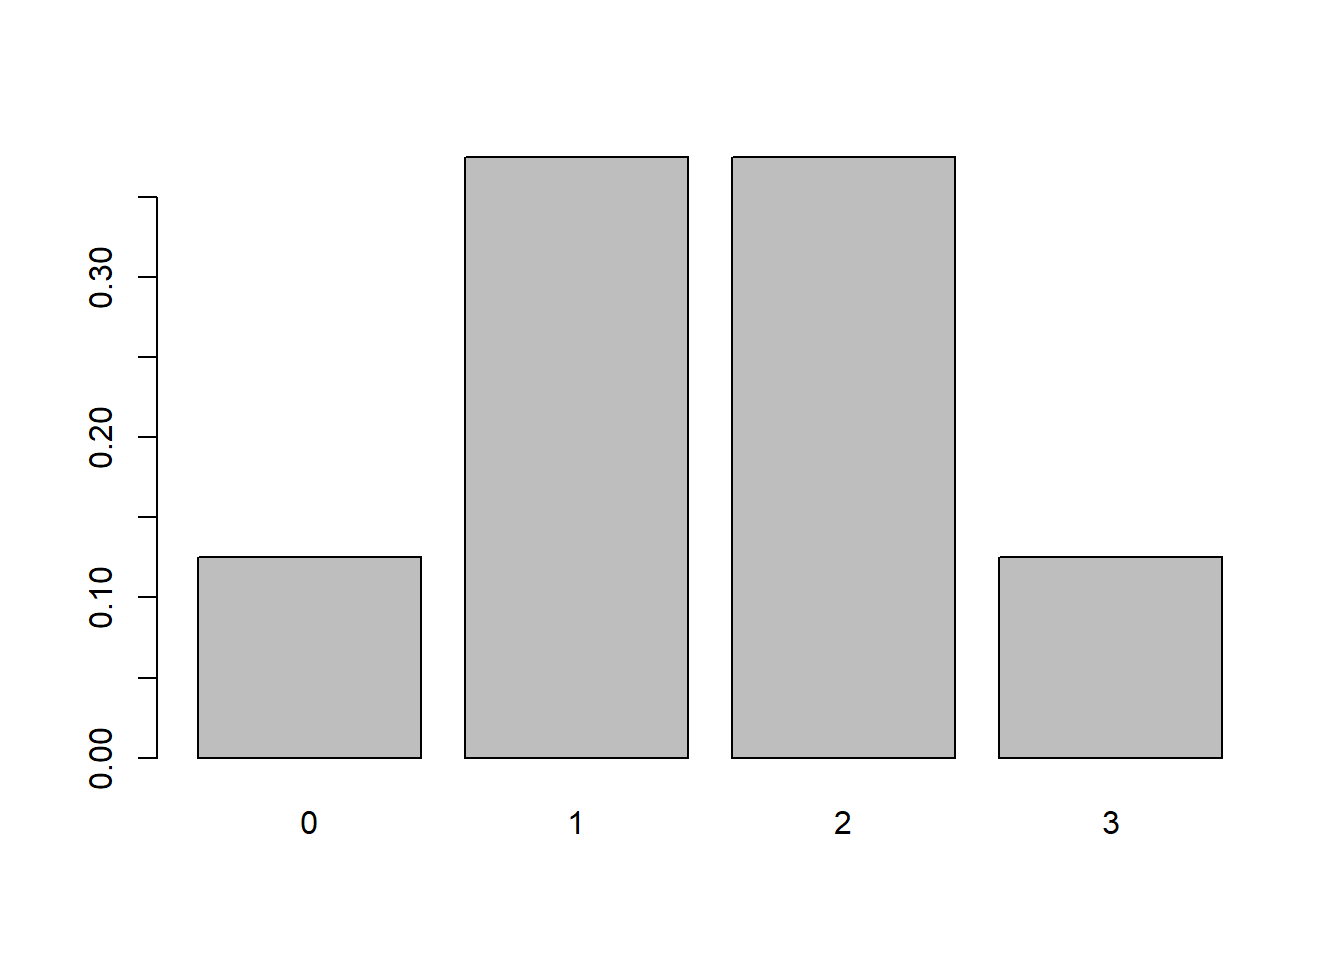 Bar plot of a binomial distribution with size 3 and probability 0.5.